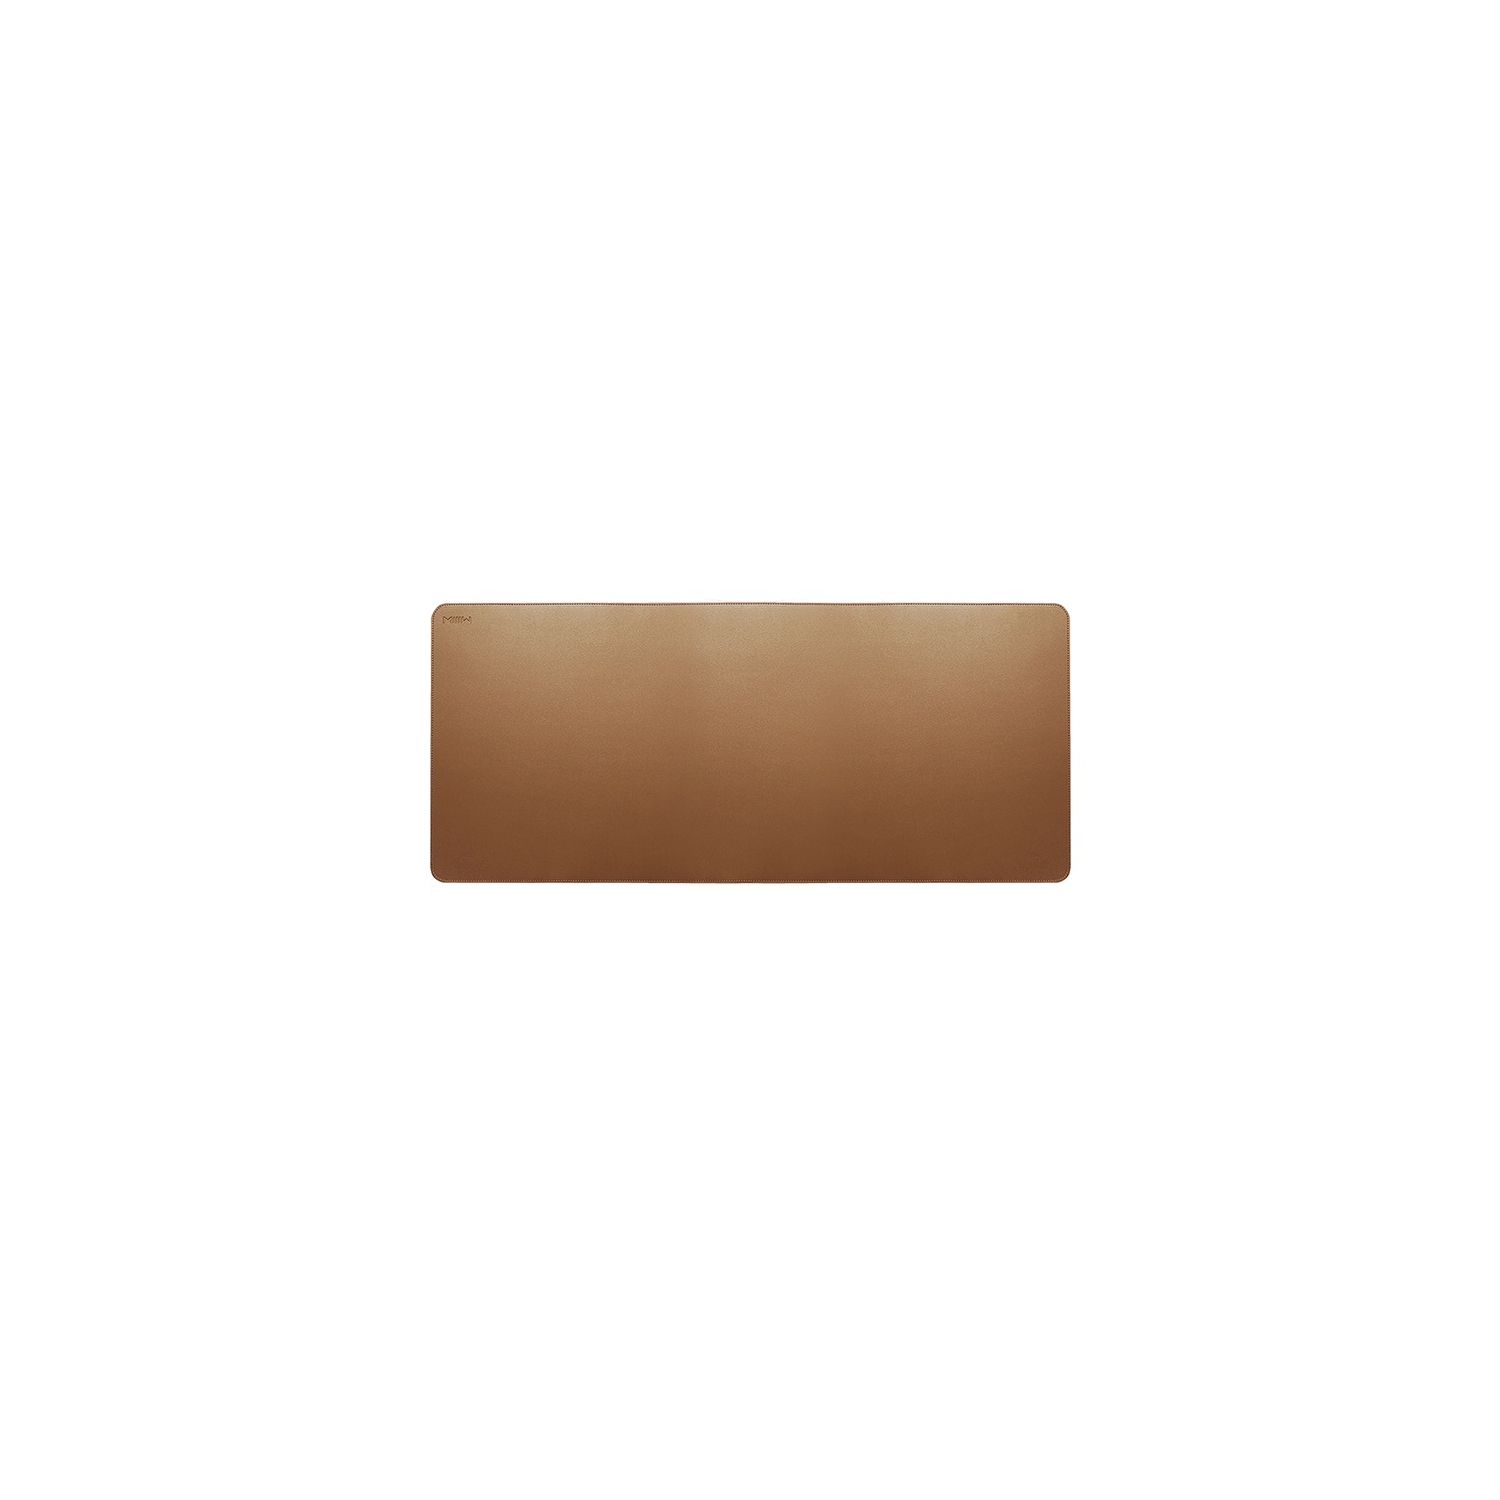 XIAOMI MIIIW M24 Oversized Leather Cork Mouse Pad,Brown